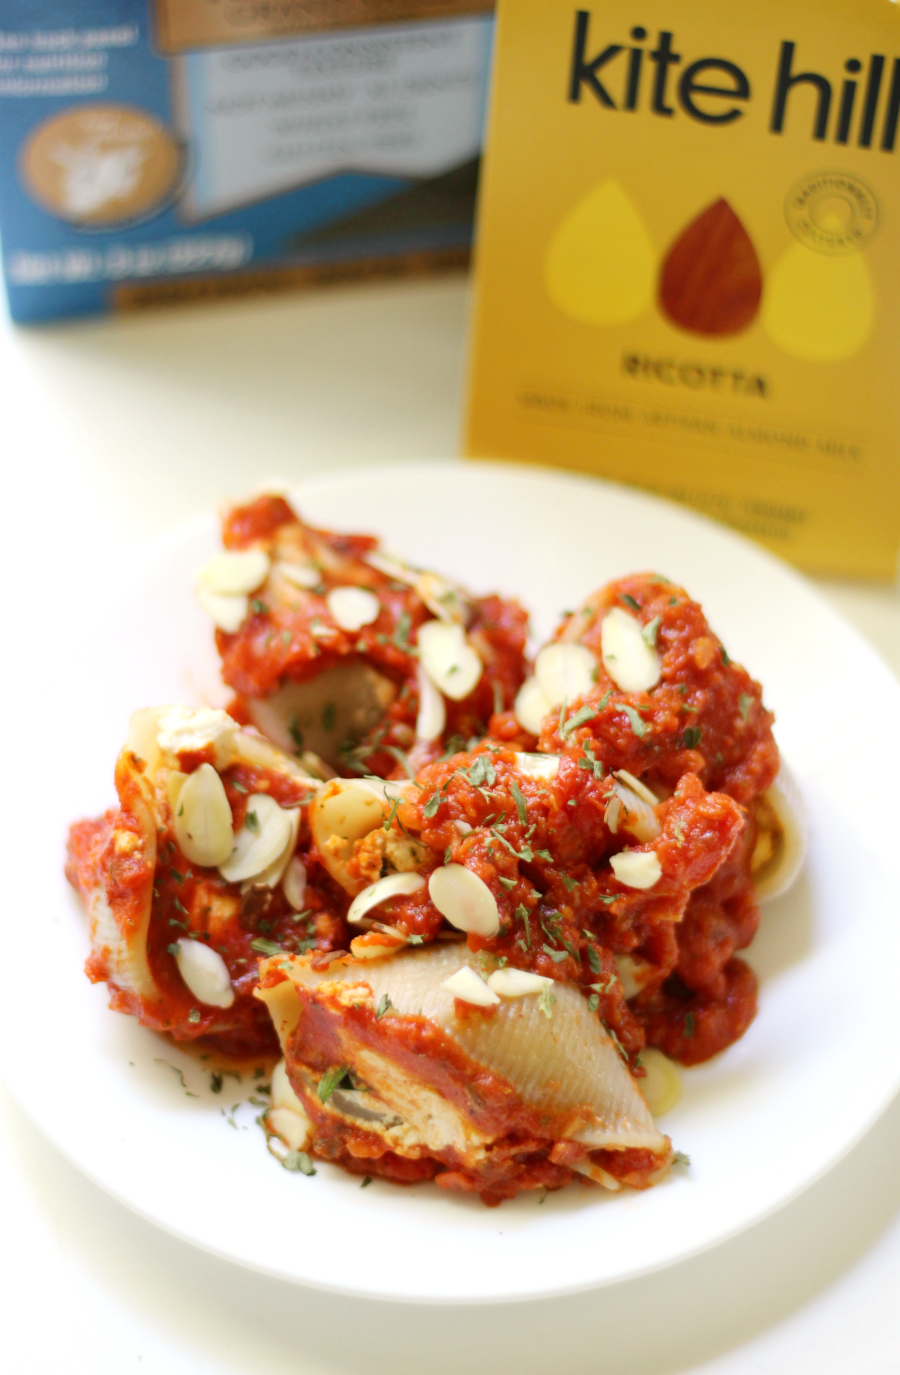 Gluten-Free Stuffed Shells with Vegan Almond Ricotta | Strength and Sunshine @RebeccaGF666 A classic Italian dinner recipe made-over so everyone can enjoy. Gluten-Free Stuffed Shells with Vegan Almond Ricotta and a homemade sun-dried tomato sauce! A cozy family meal that leaves bellies full and hearts warm!